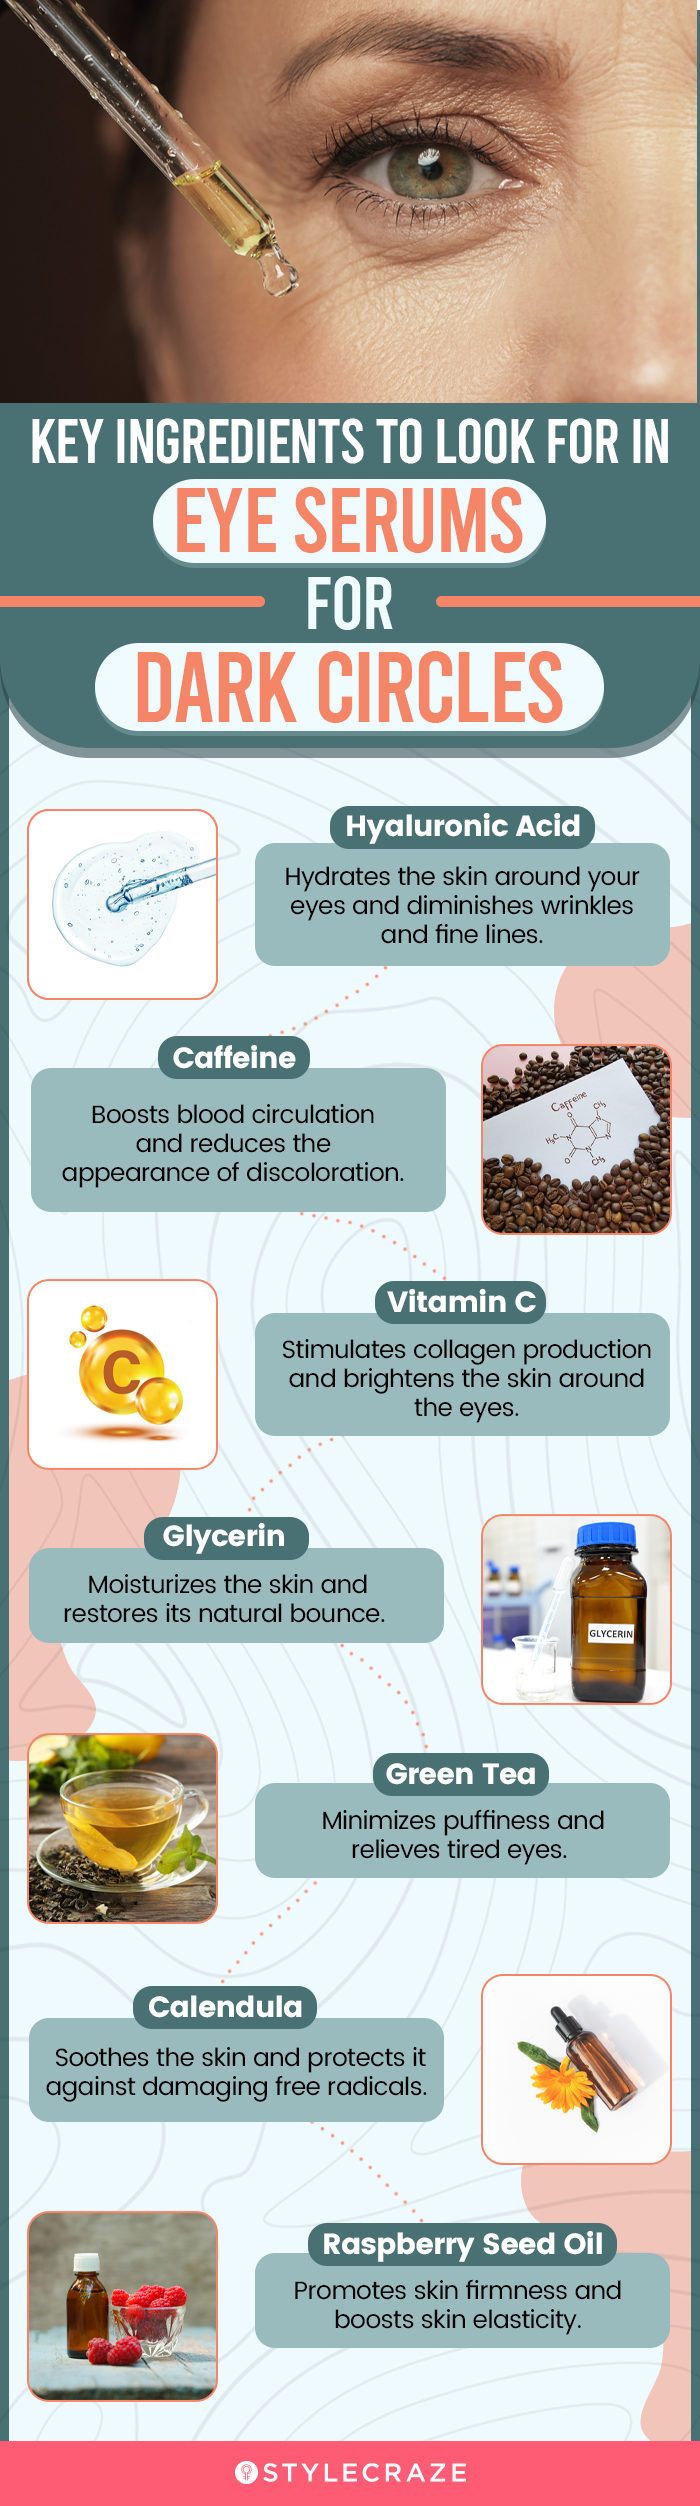 Key Ingredients To Look For In Eye Serums For Dark Circles (infographic)